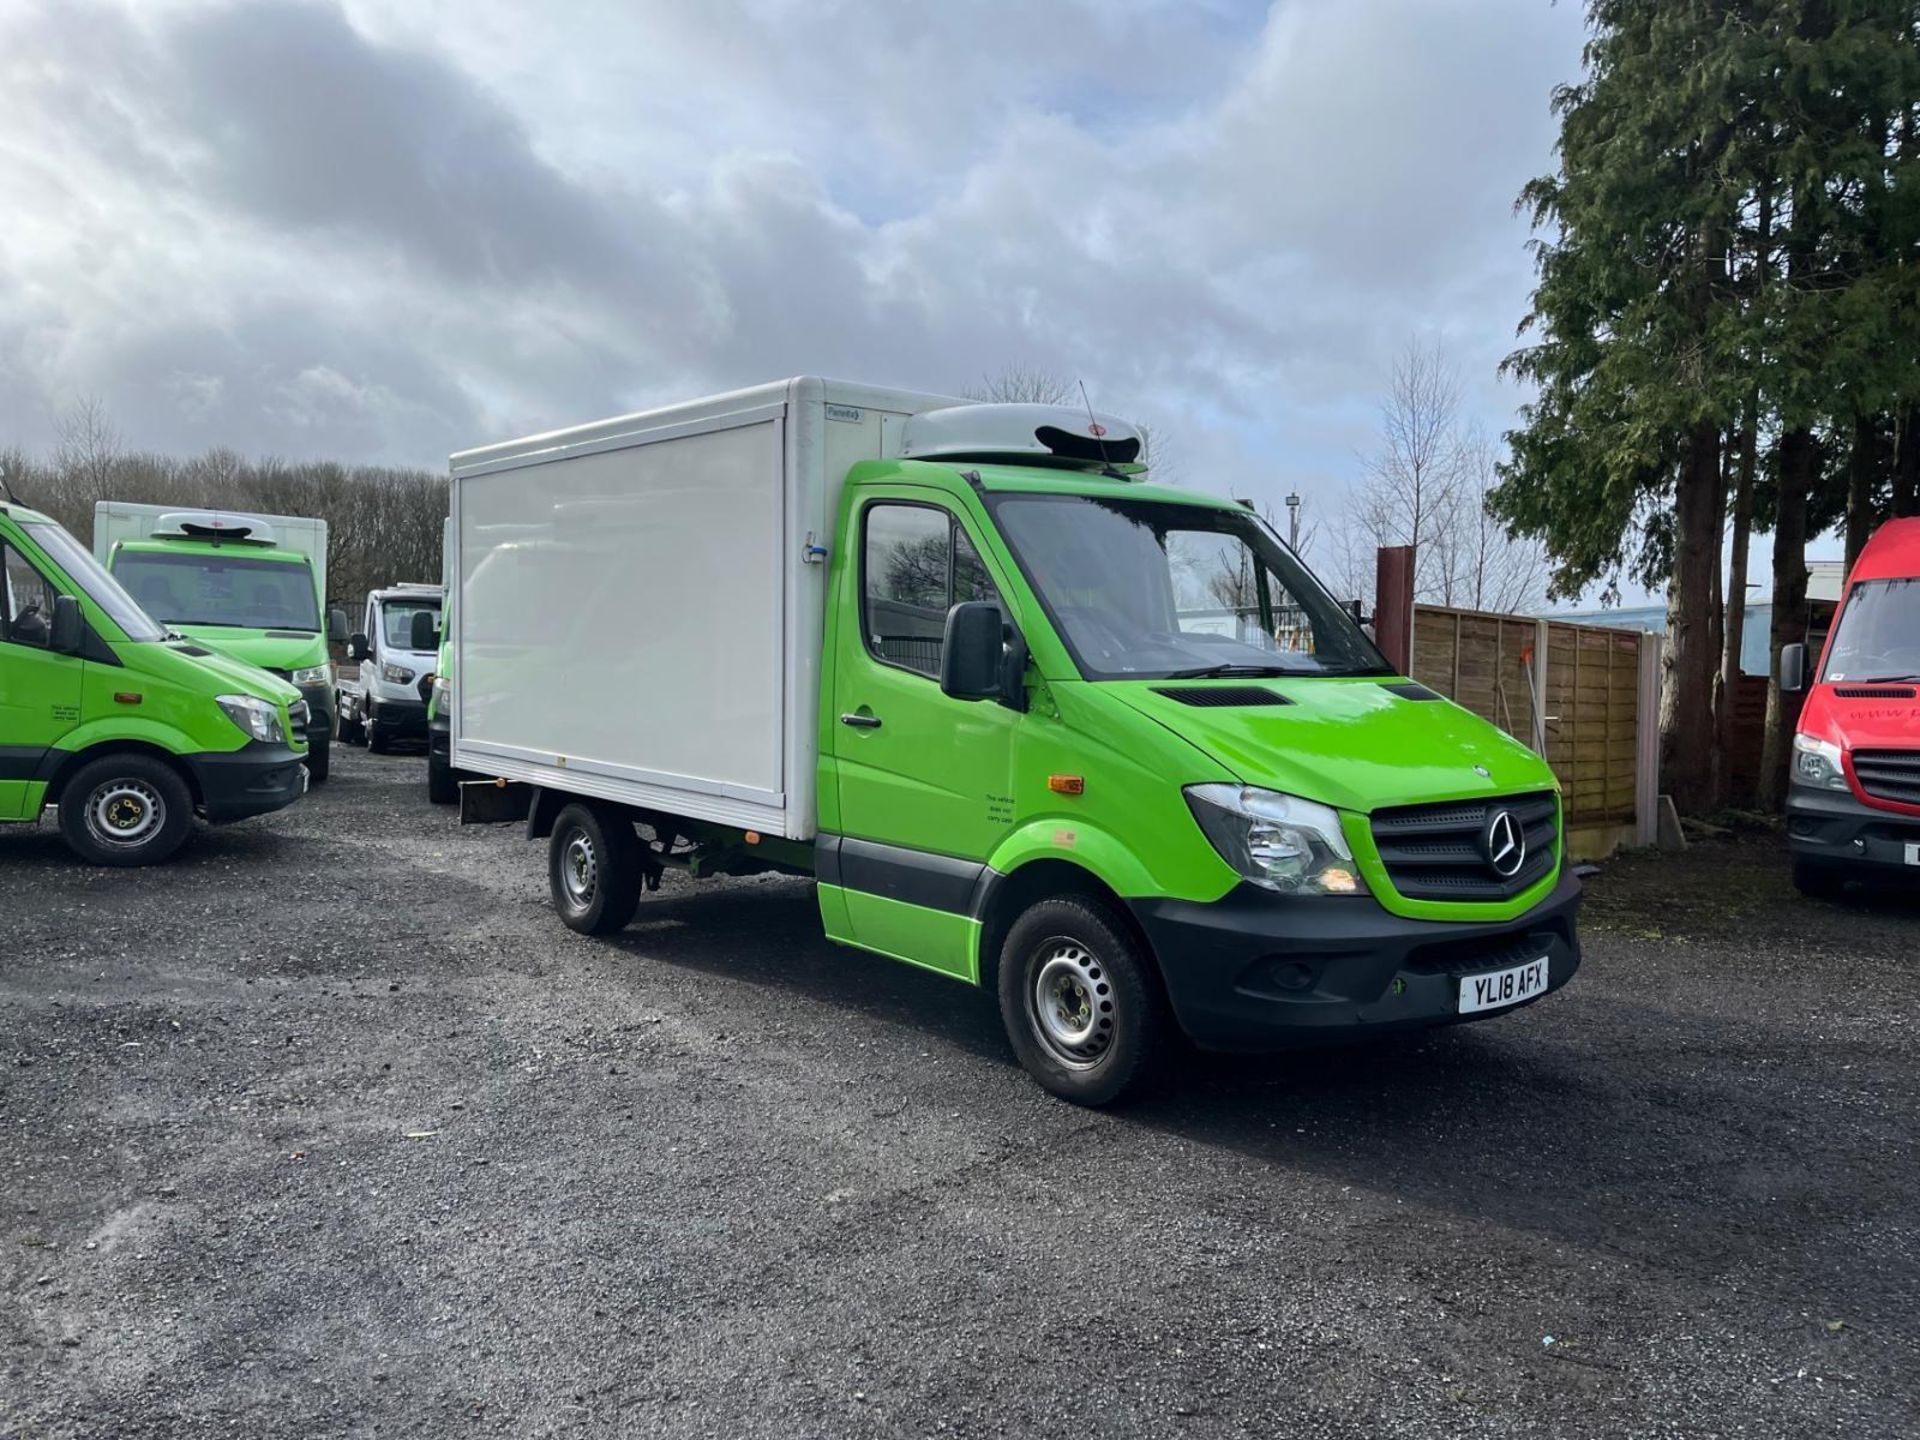 2018 MERCEDES-BENZ SPRINTER 314 CDI FRIDGE FREEZER CHASSIS CAB READY FOR YOUR BUSINESS!